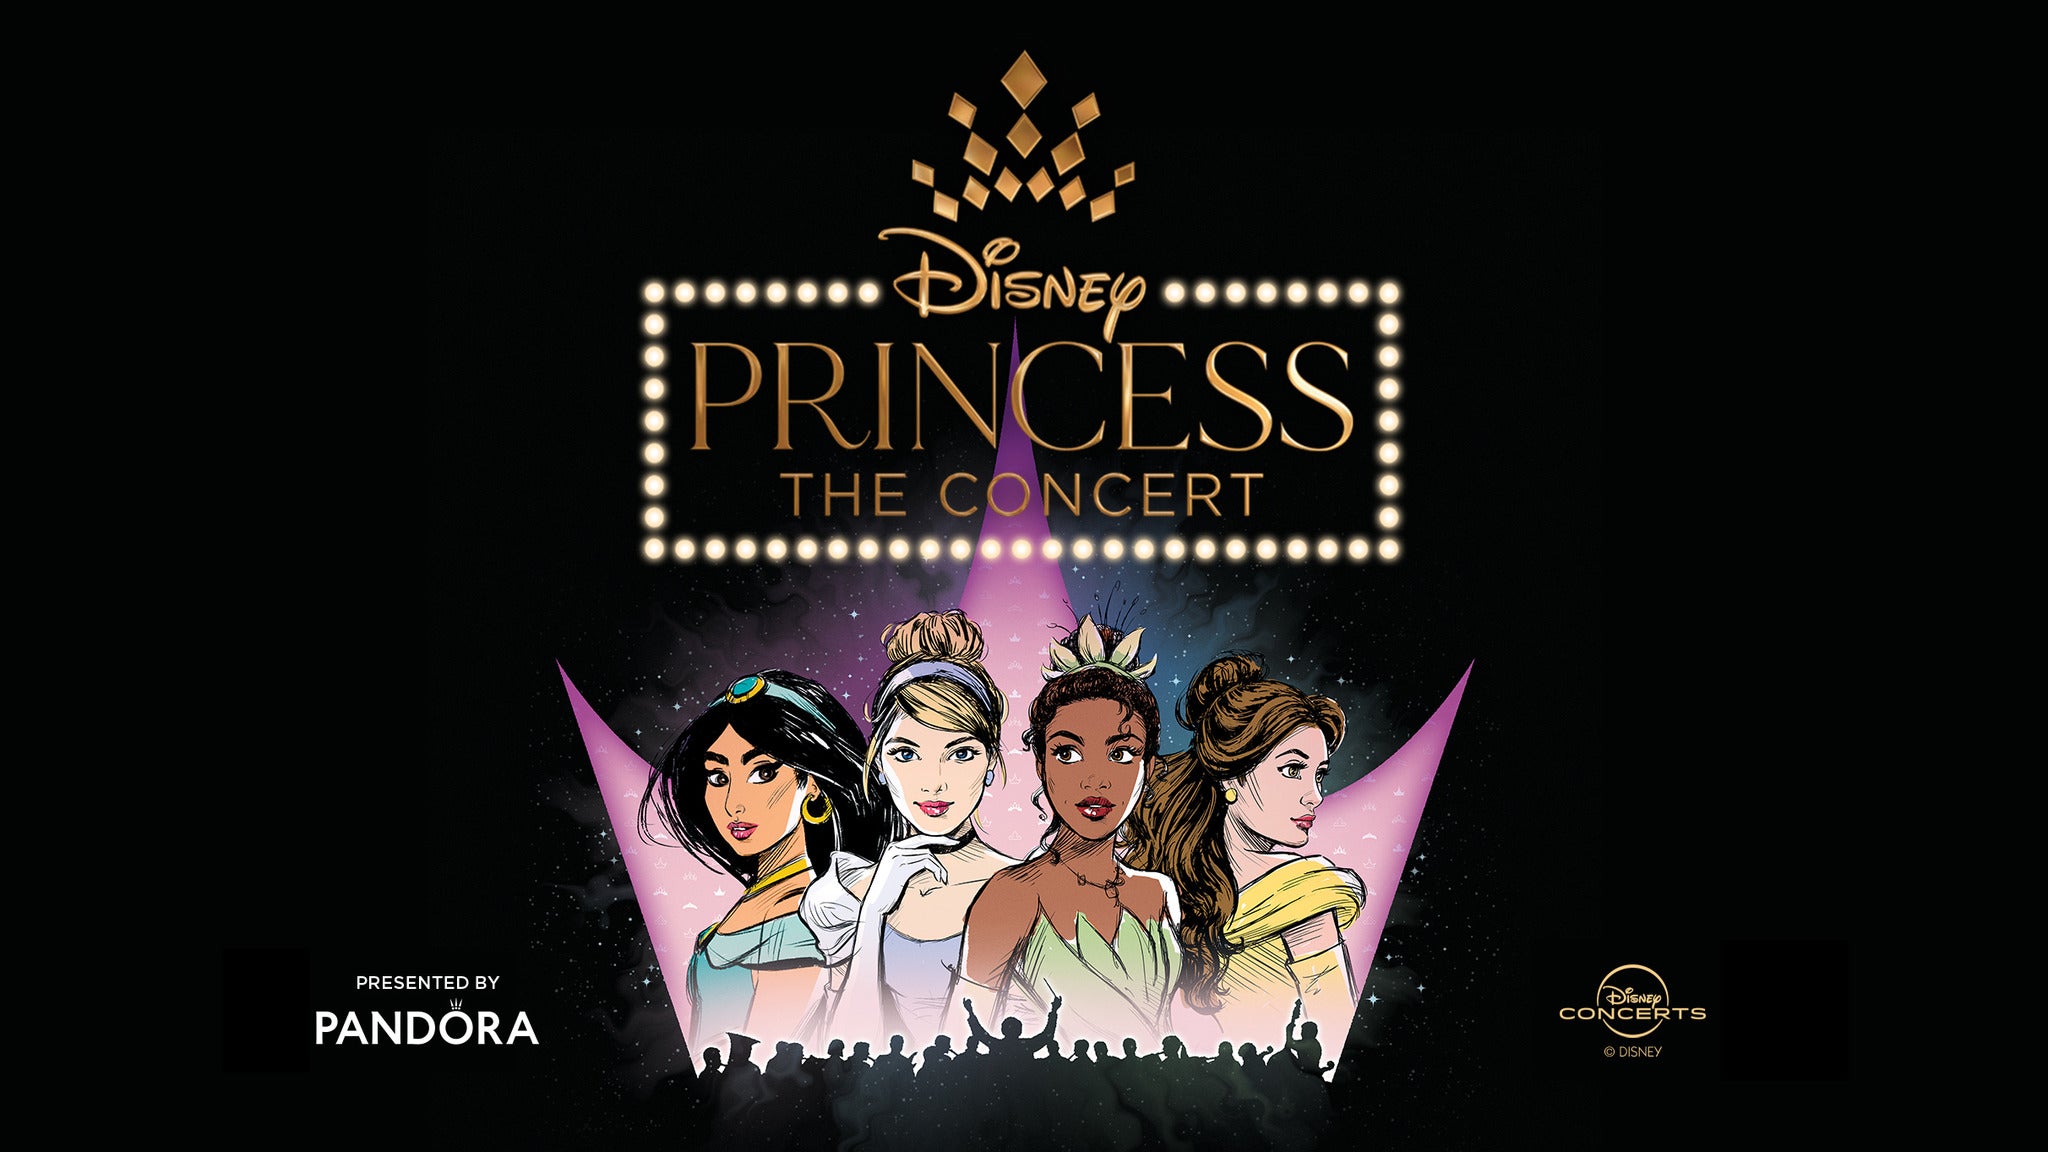 Main image for event titled Disney Princess: The Concert